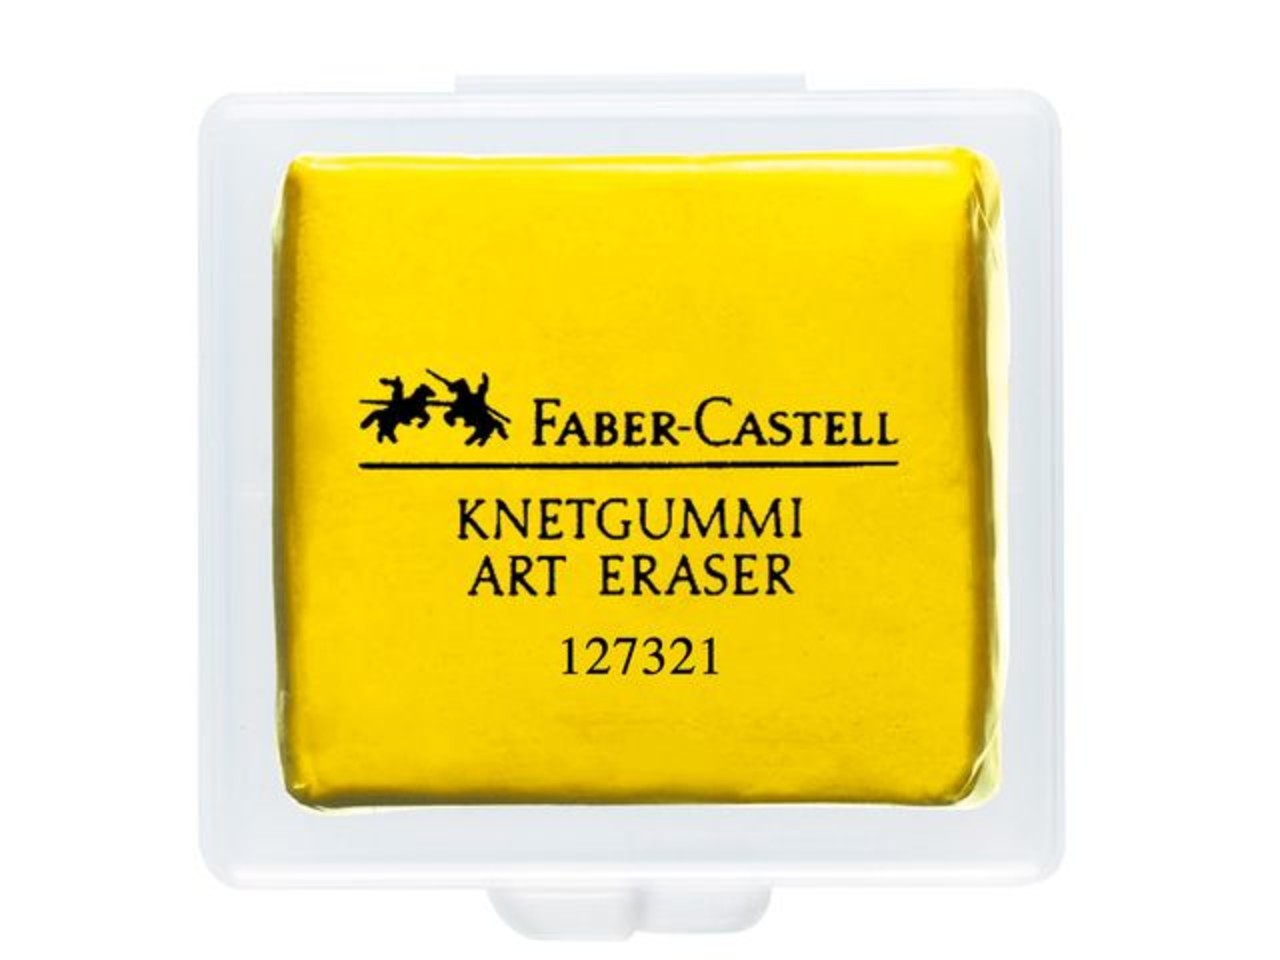 Faber-Castell Kneadable Eraser in Plastic Box (Pack of 3)